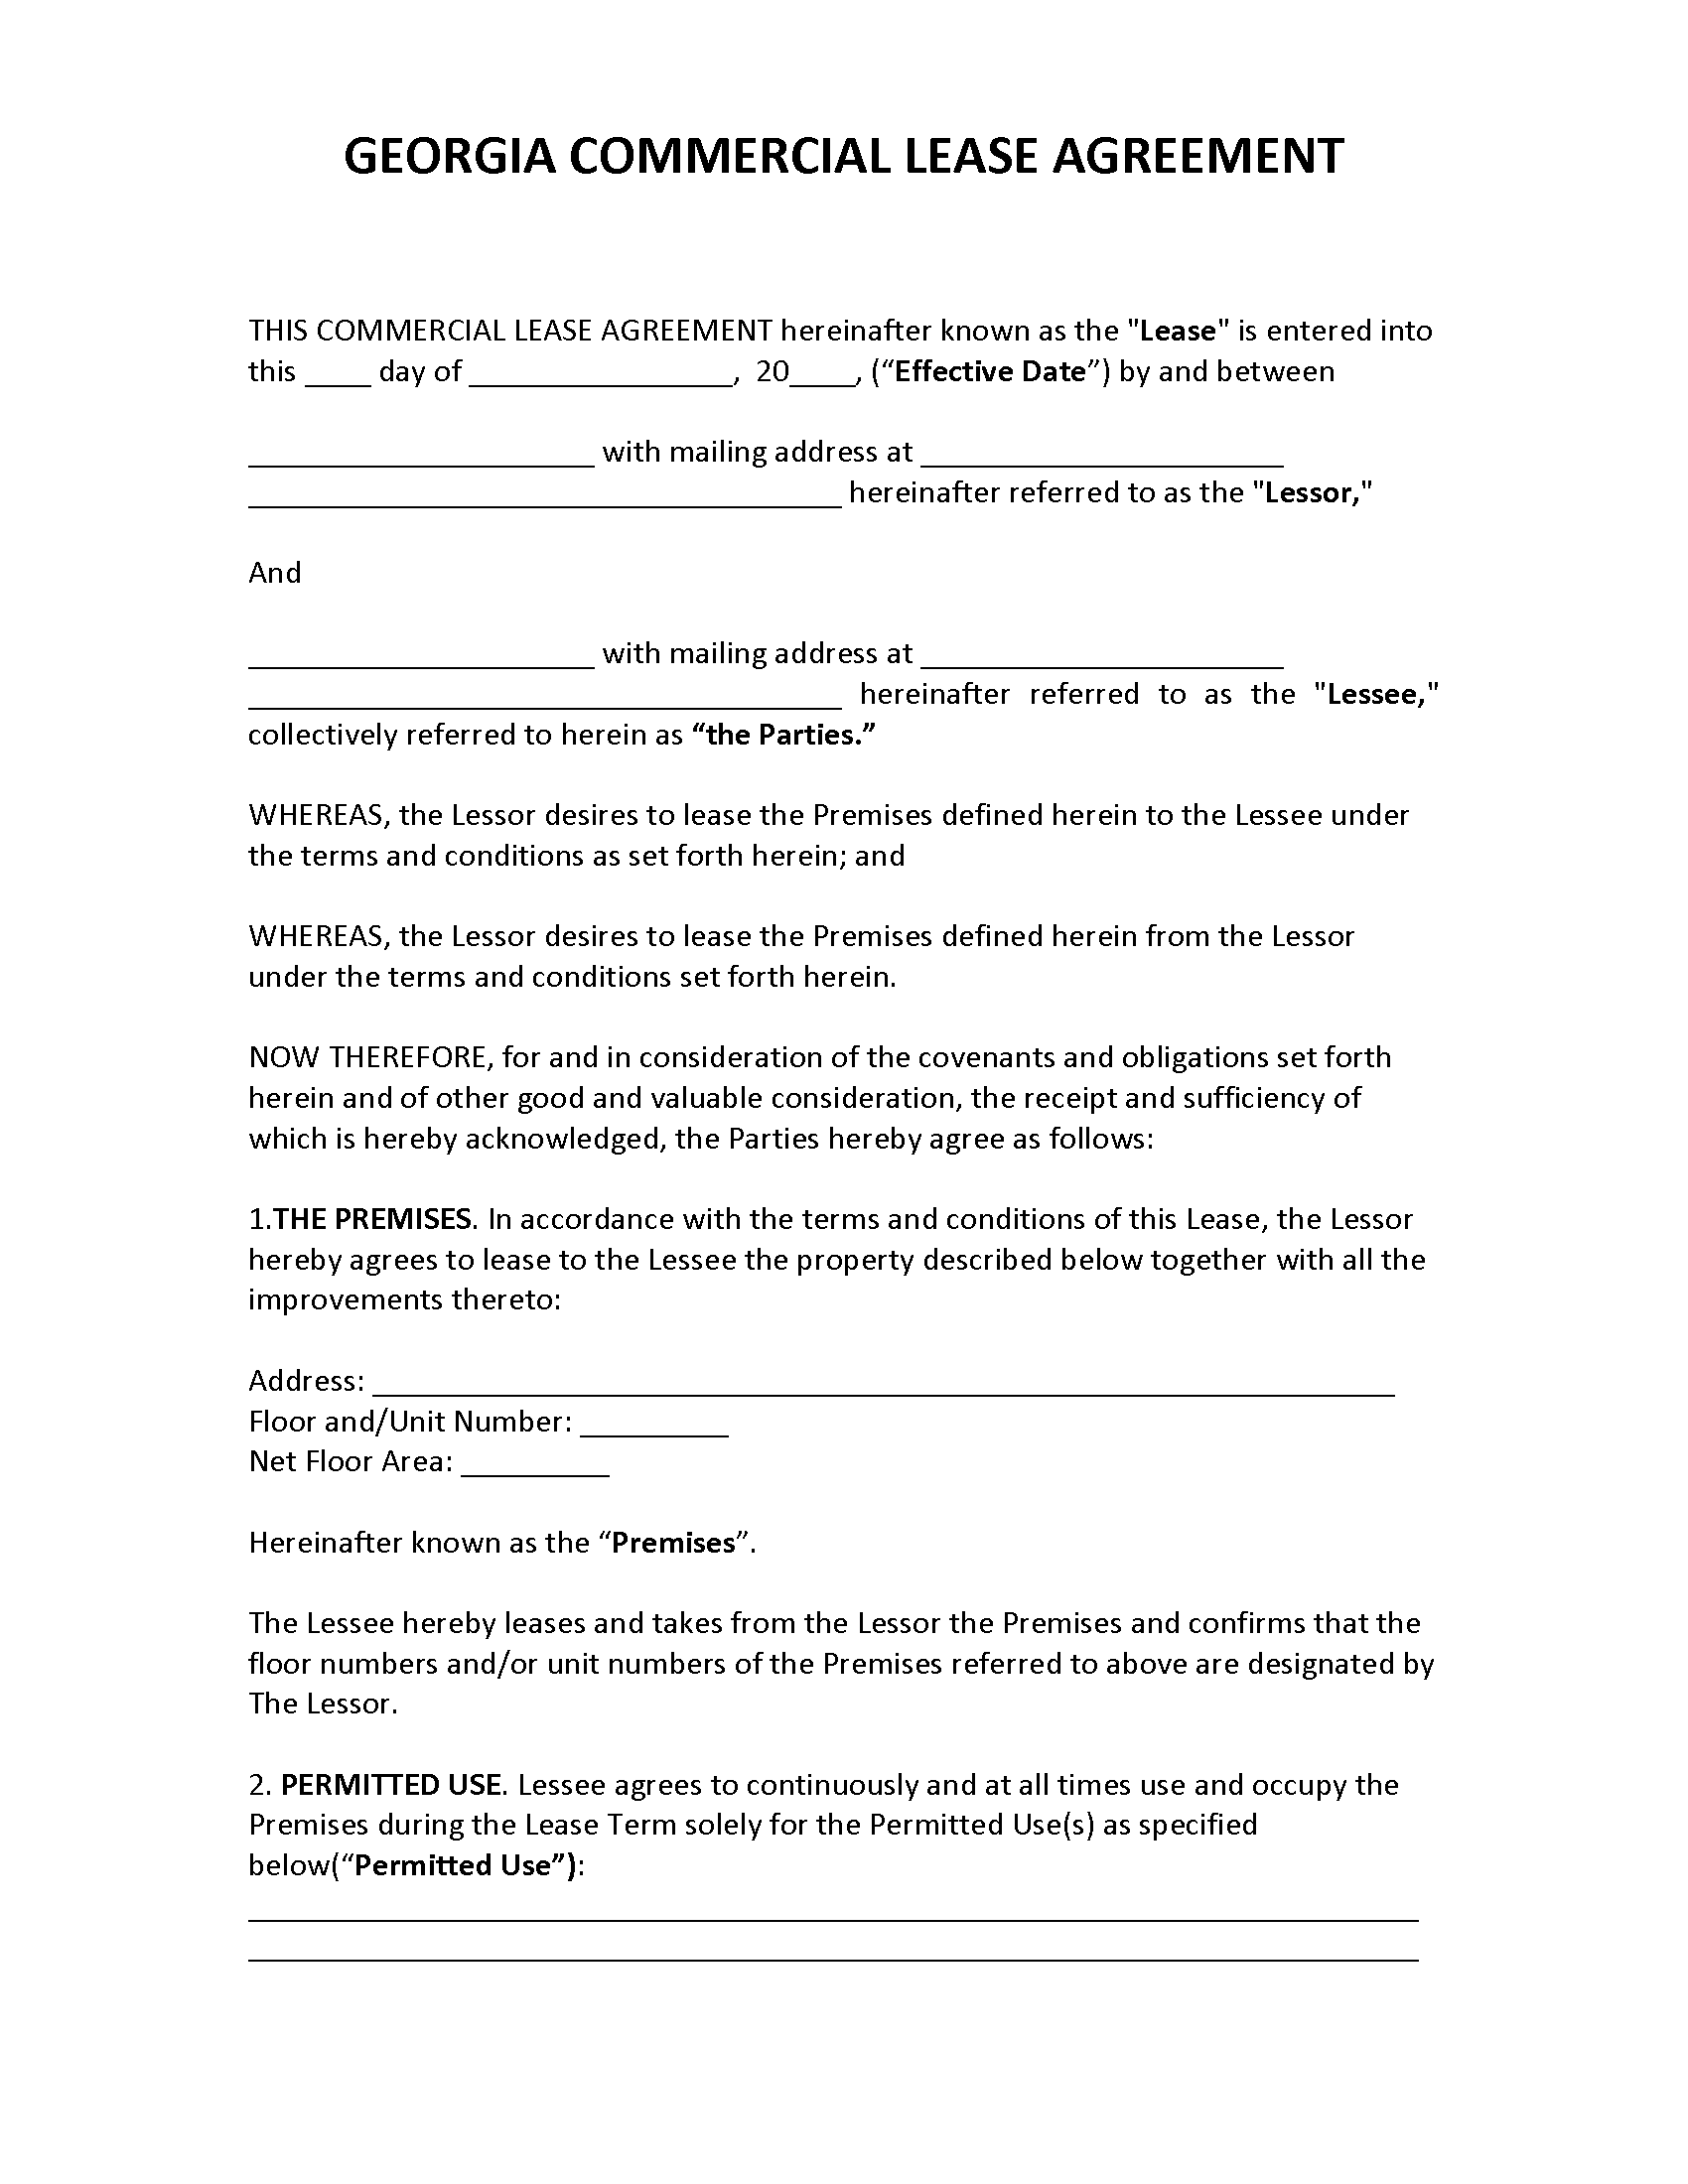 sample-rent-to-own-lease-agreement-free-printable-documents